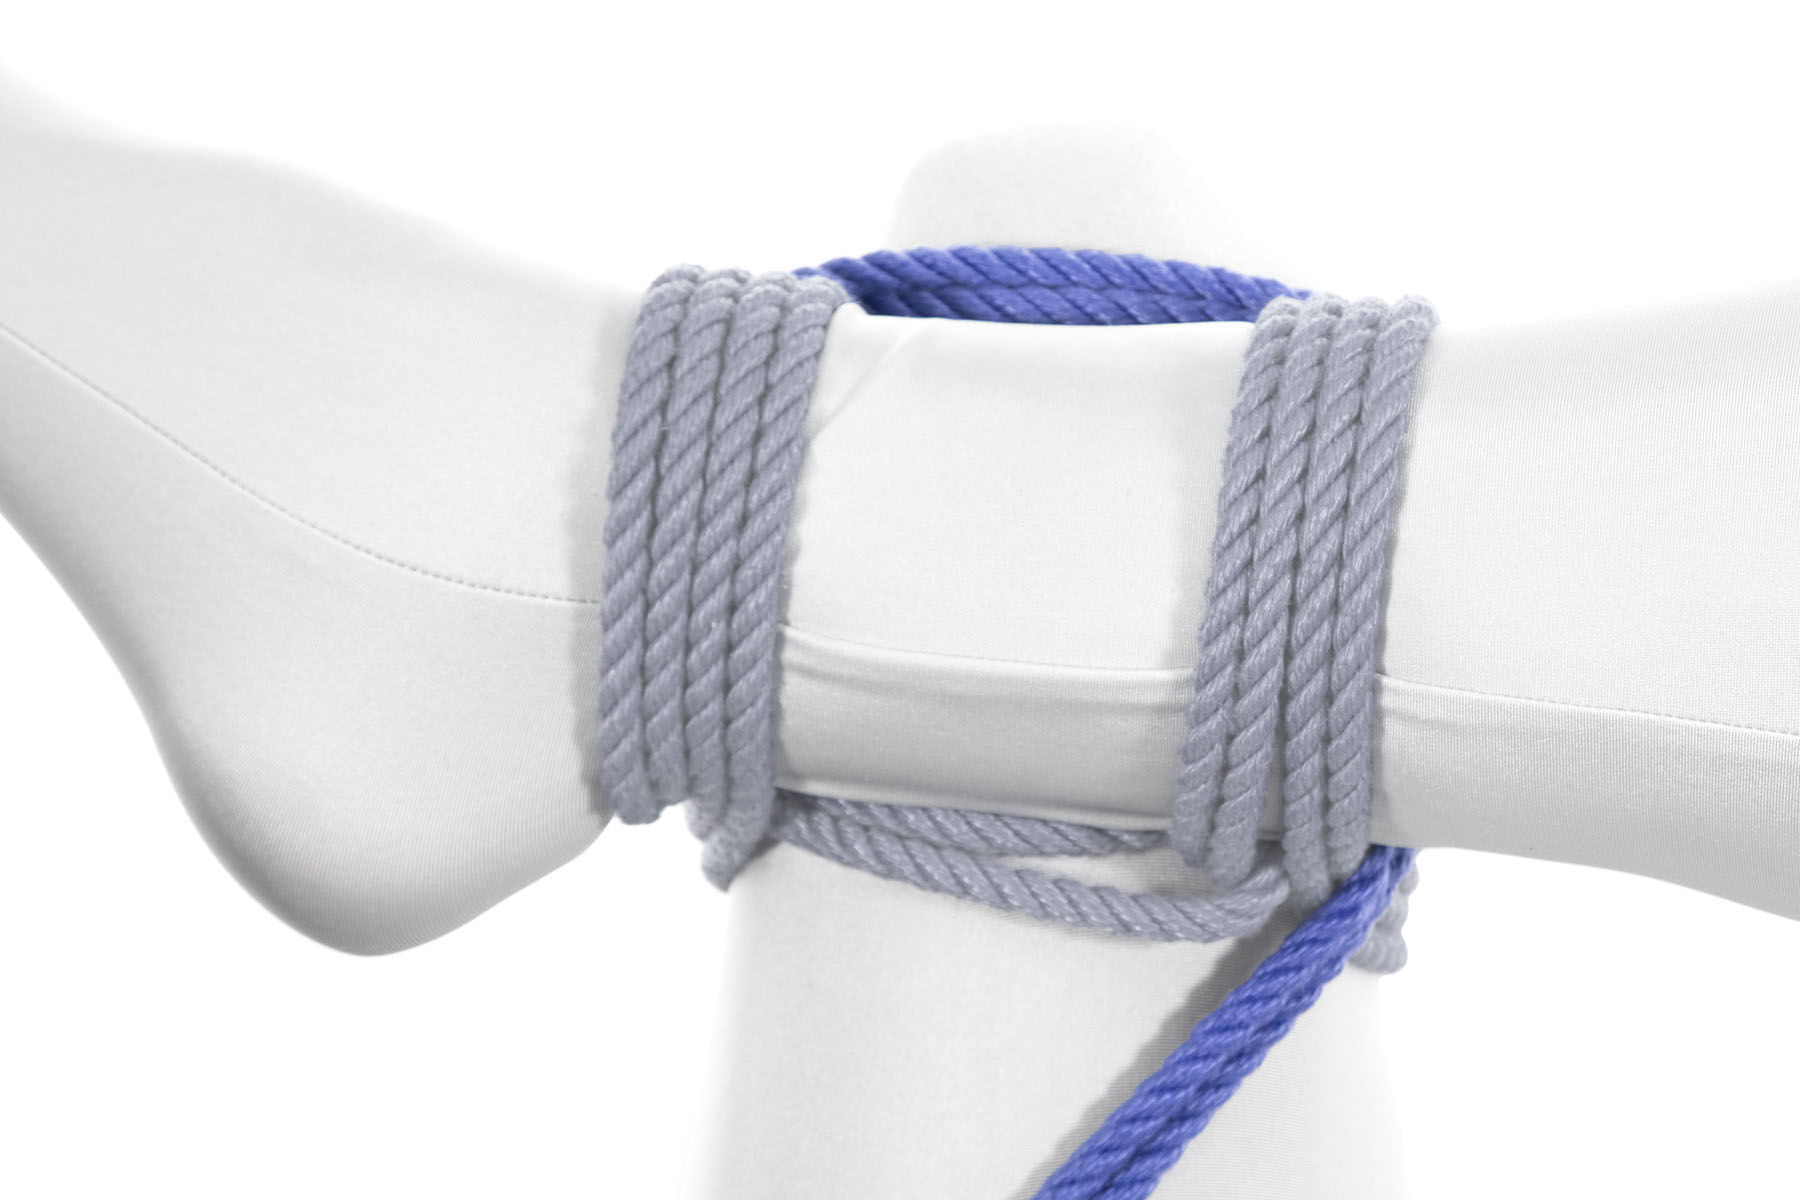 The rope now starts making a square. It crosses to the right over the left leg right above the knee, and wedged against the wraps that bind the right leg to it. It then crosses under the right leg, moving toward the body. It re-emerges on the lower right of the frame.